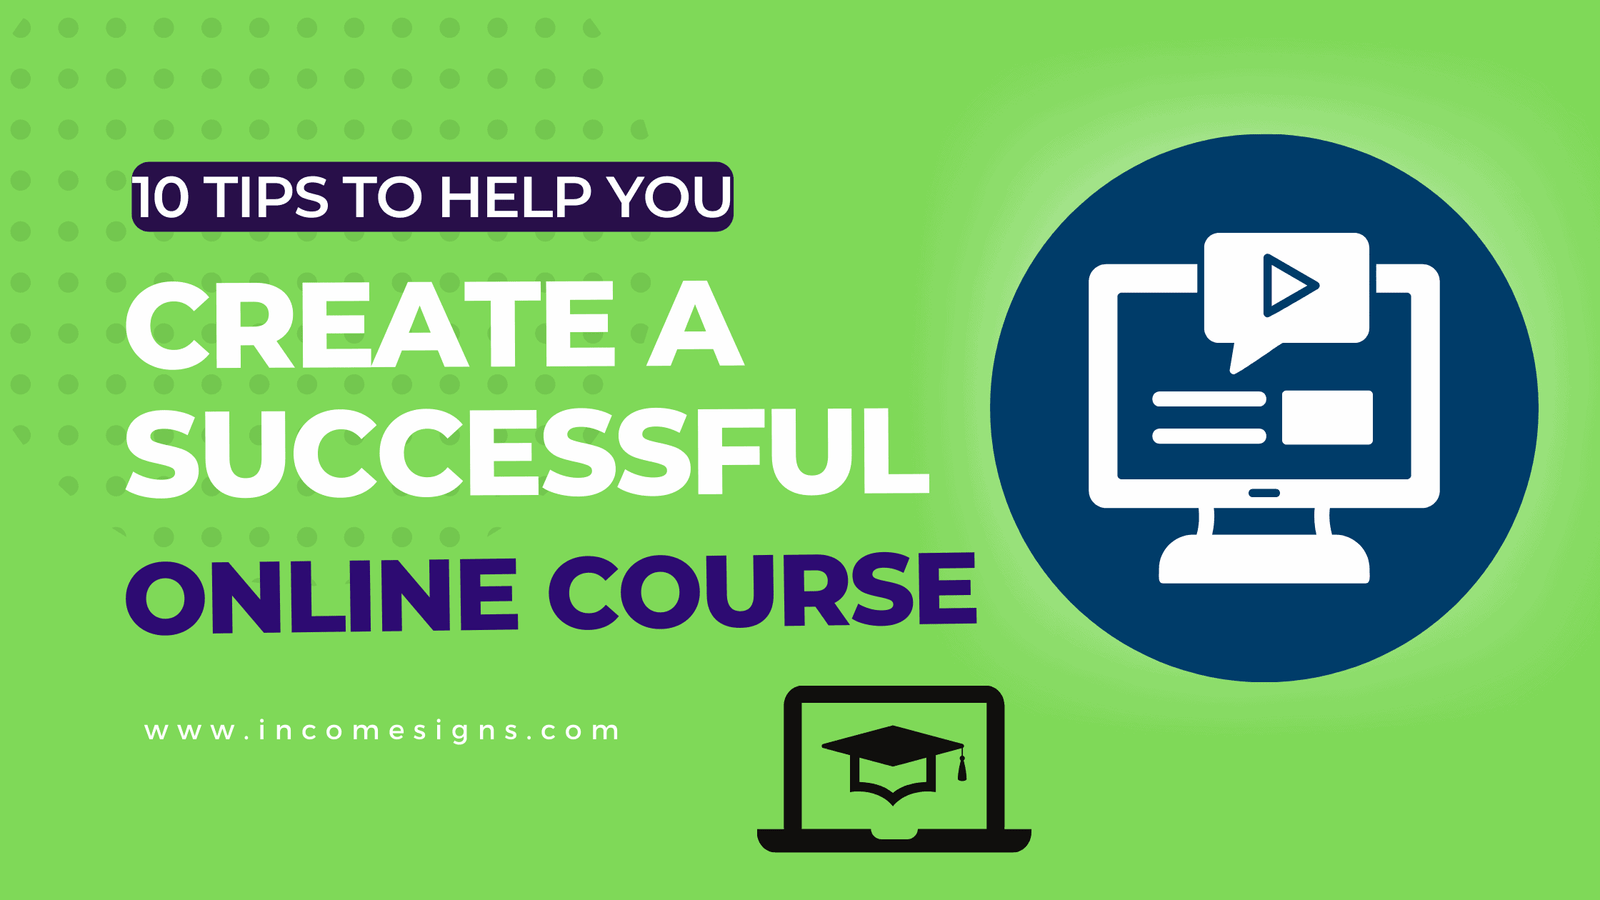 10 Tips to Help You Create a Successful Online Course